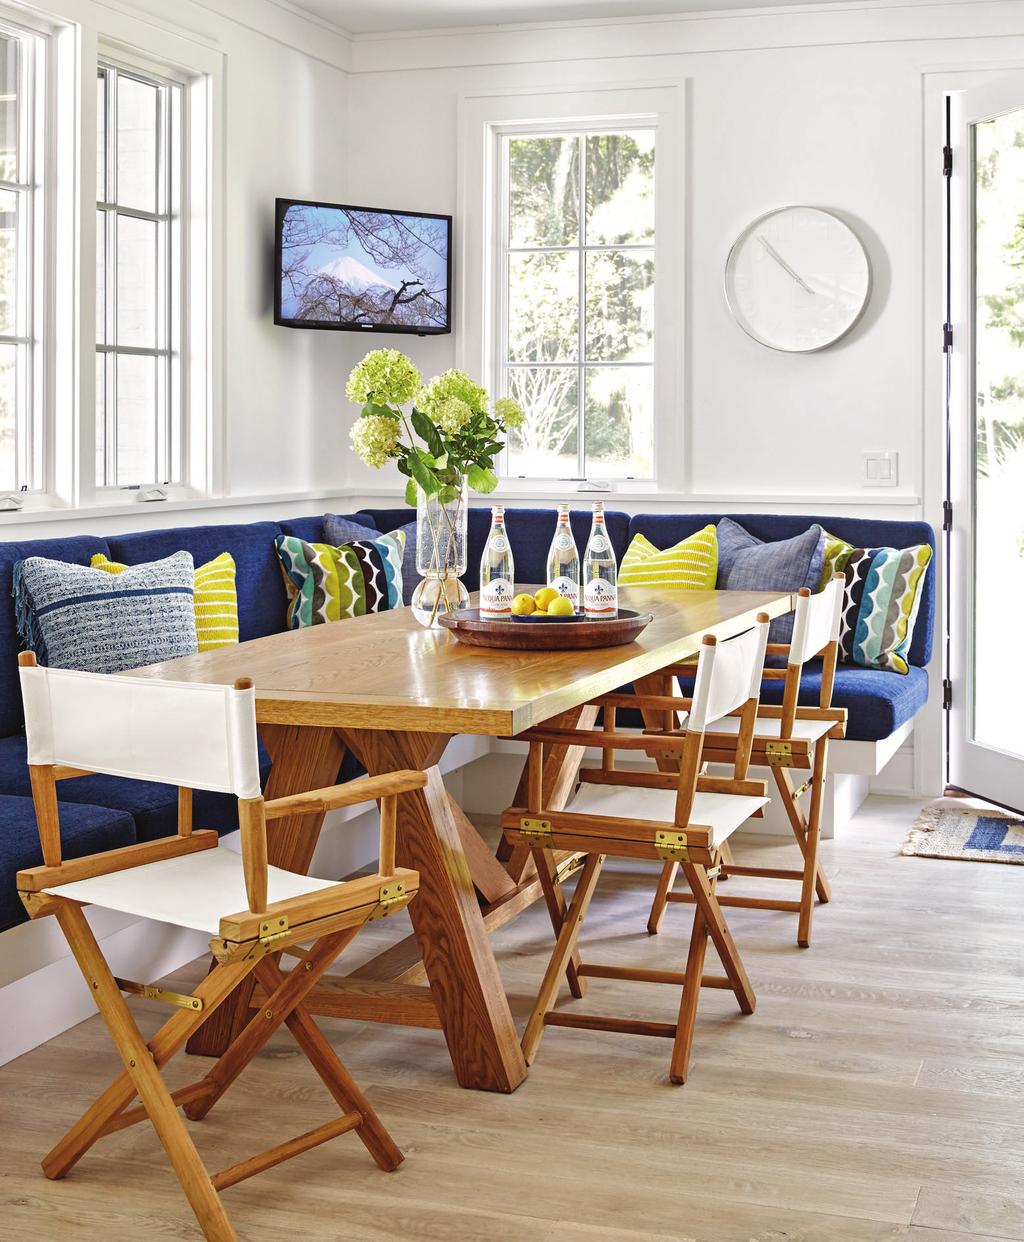 The banquette cushions wear soft but durable chenille; pillows in outdoor fabrics punch up the navy with citrusy hues.